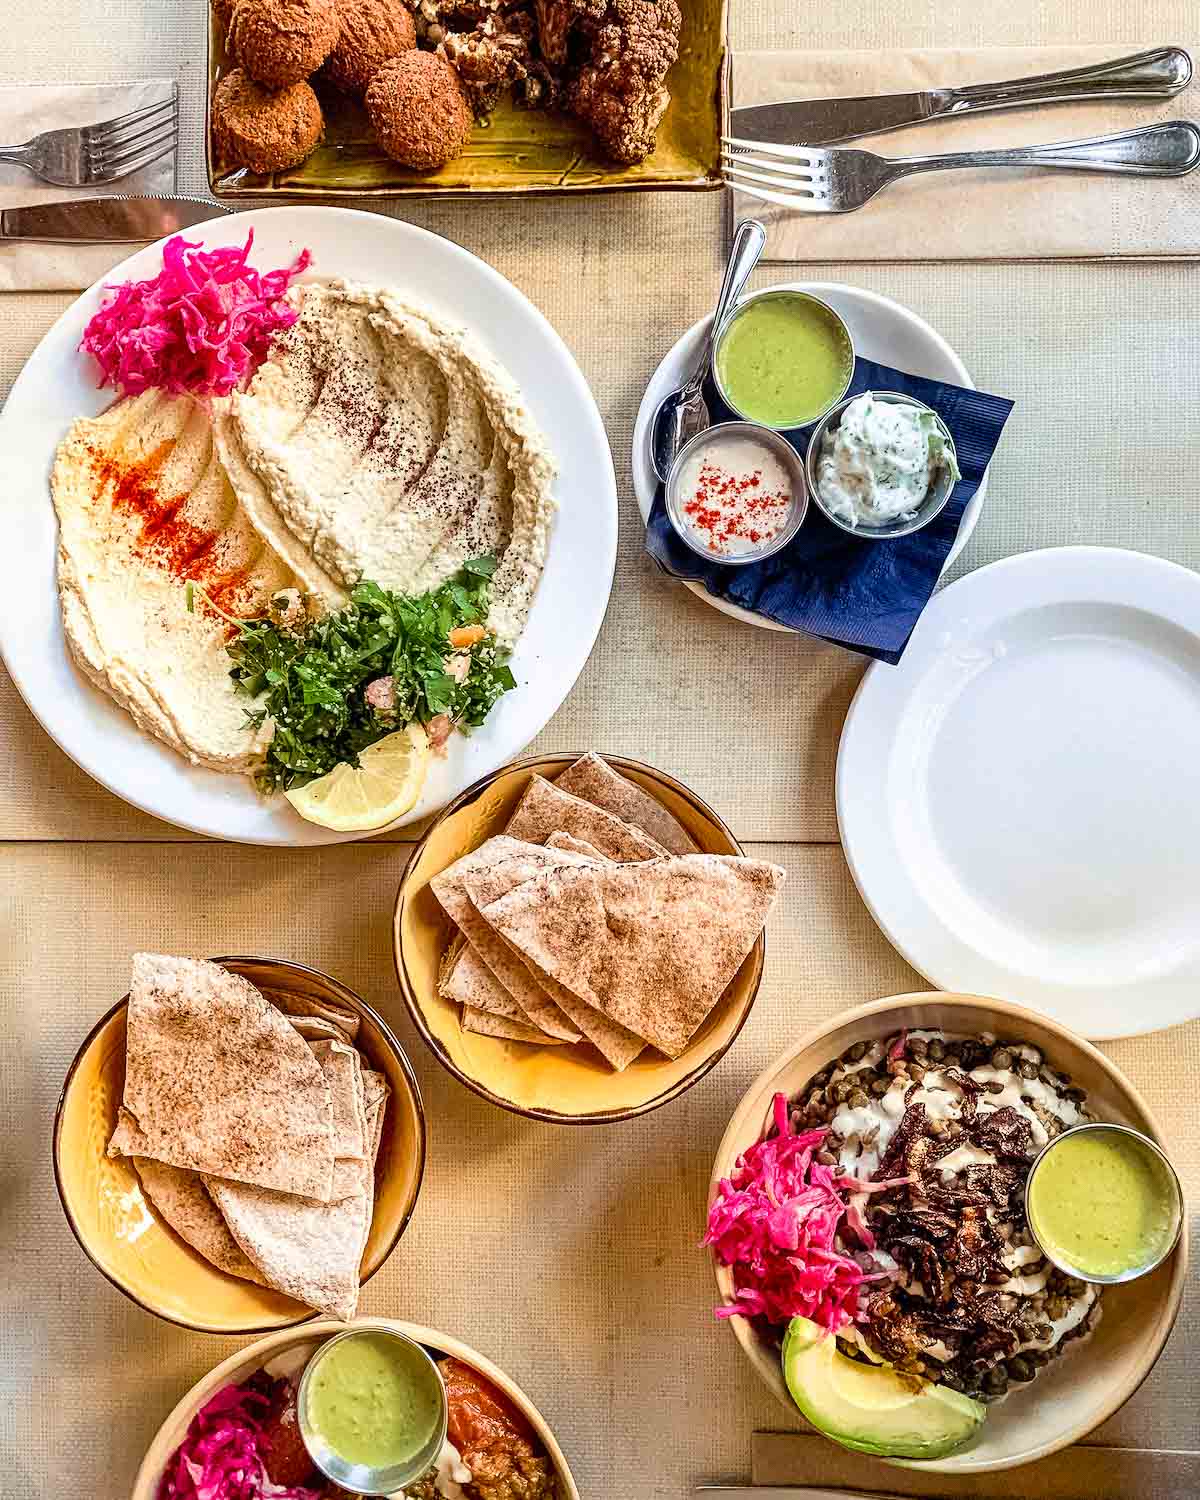 25 Best Vegan Restaurants in Vancouver BC for 2023 - overhead view of hummus plates, mjadra bowl and pitta at Nuba.